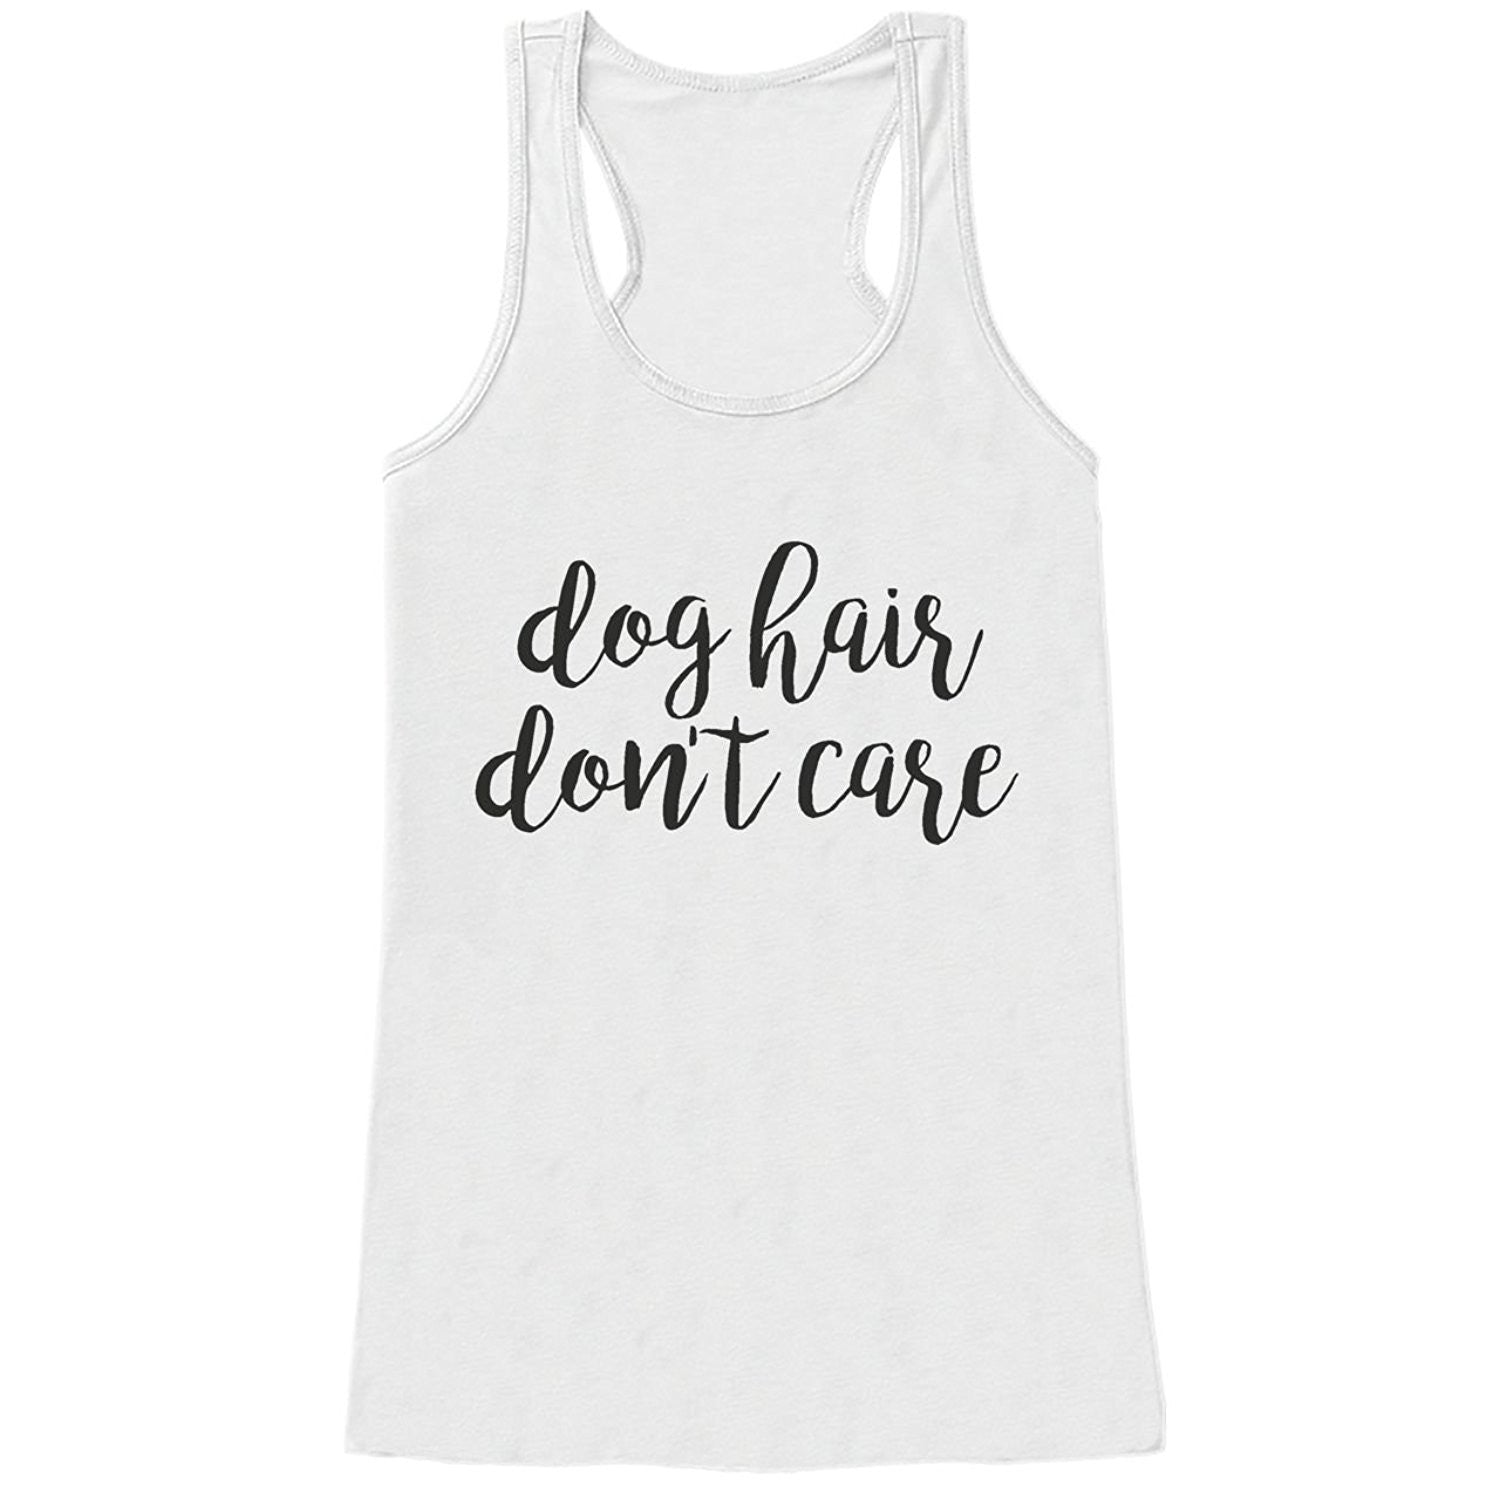 7 ate 9 Apparel Womens Dog Hair Don't Care Funny Tank Top